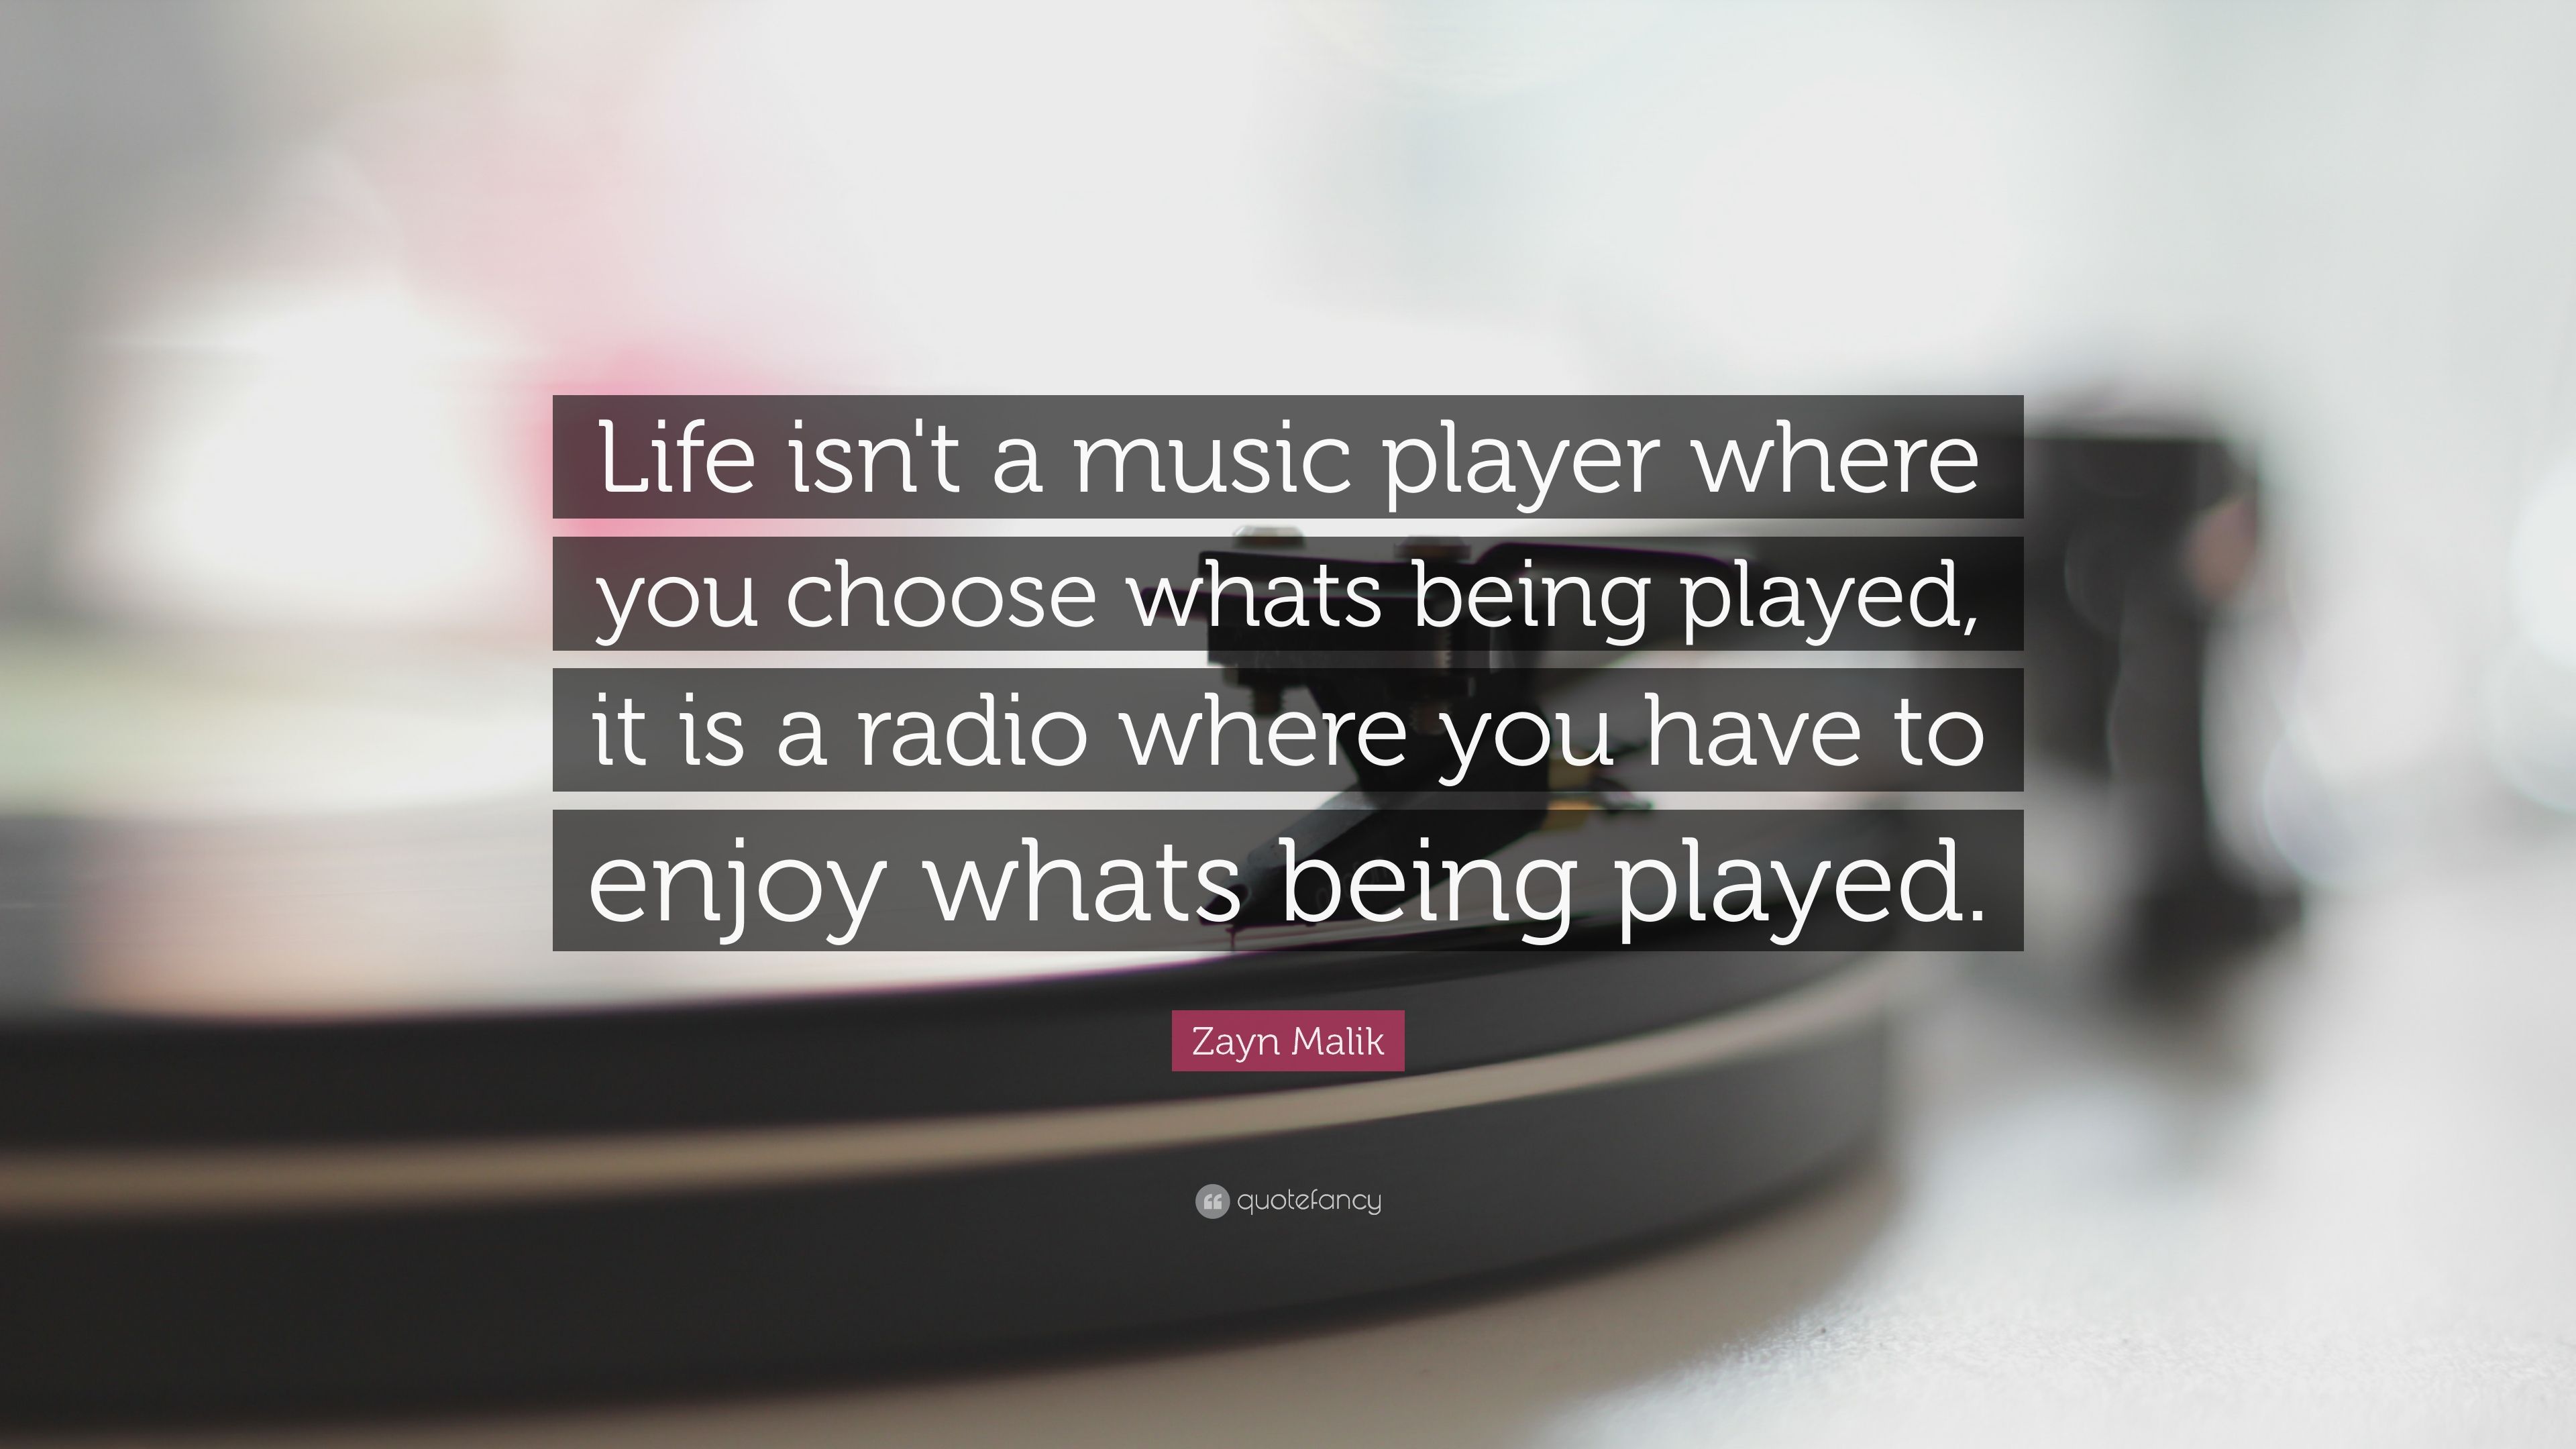 Zayn Malik Quote: “Life isn't a music player where you choose whats being played, it is a radio where you have to enjoy whats being played.” (16 wallpaper)